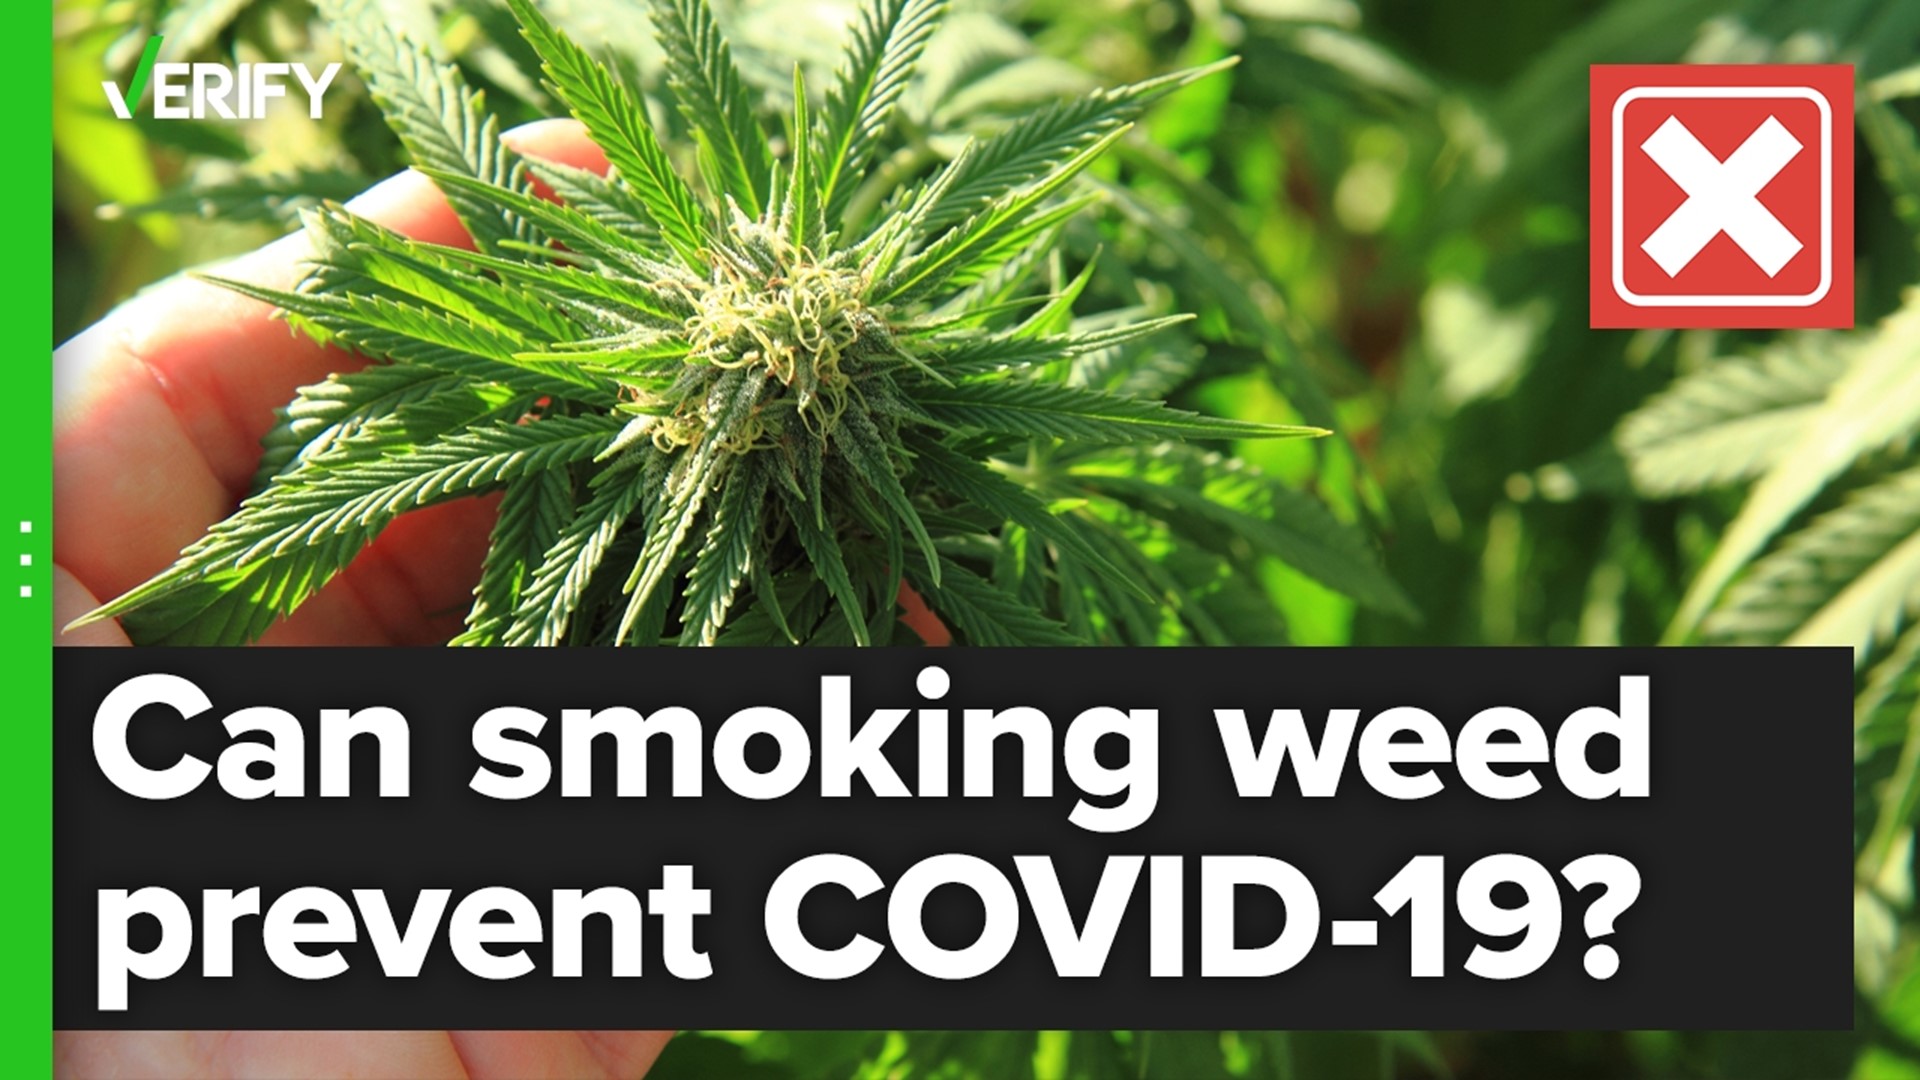 A study looked at the impact certain chemicals in cannabis have on COVID-19, but the research doesn’t show that smoking marijuana can protect against infection.